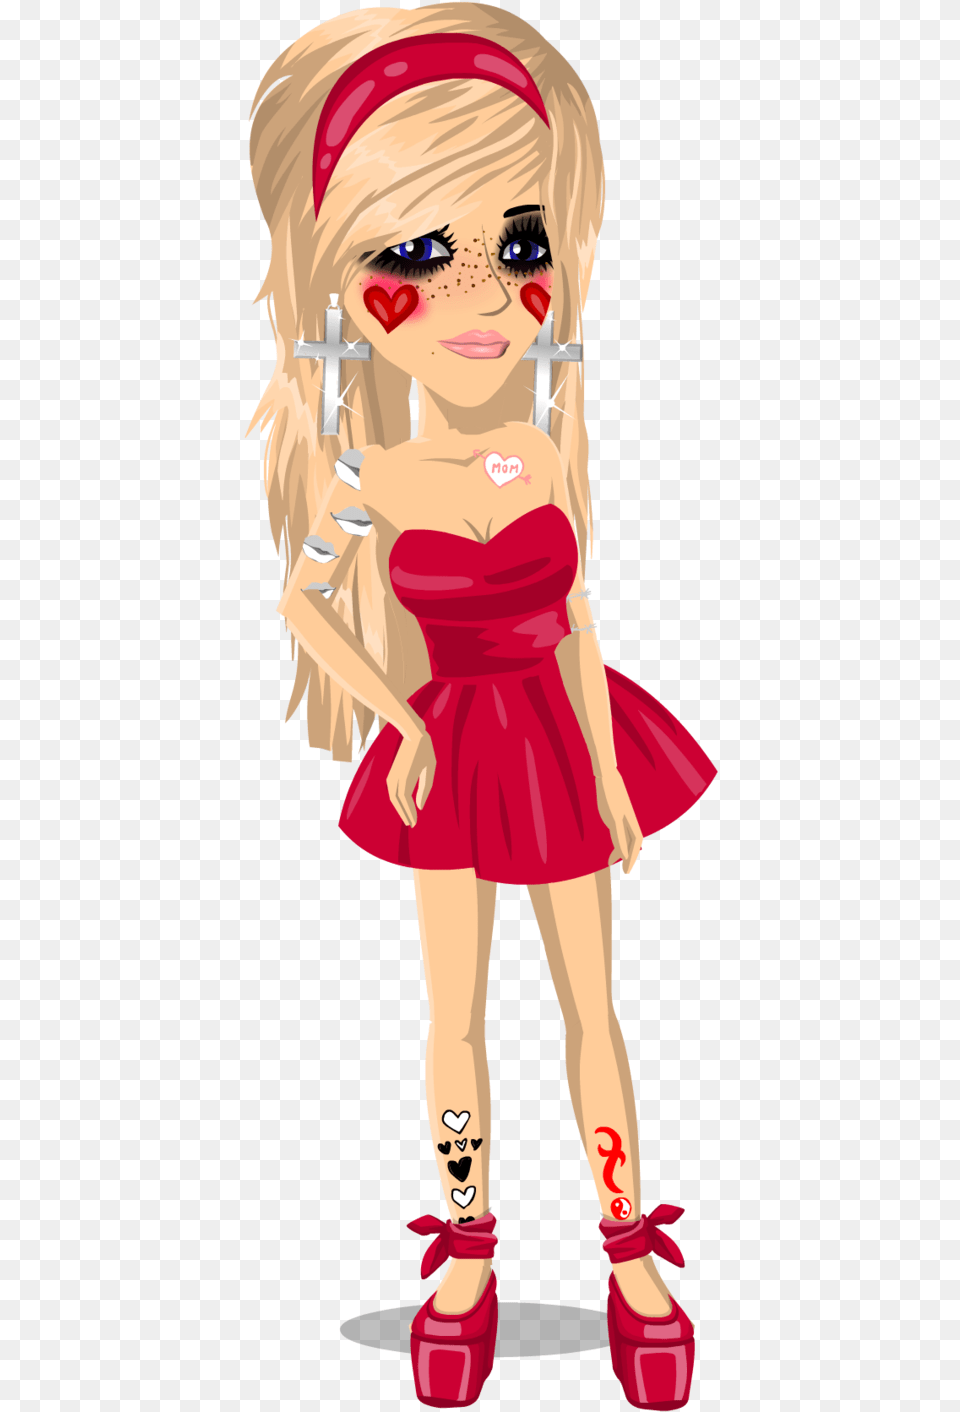 Moviestarplanet Wiki Wikia Movie Star Planet Vip Girls, Adult, Person, Woman, Female Png Image